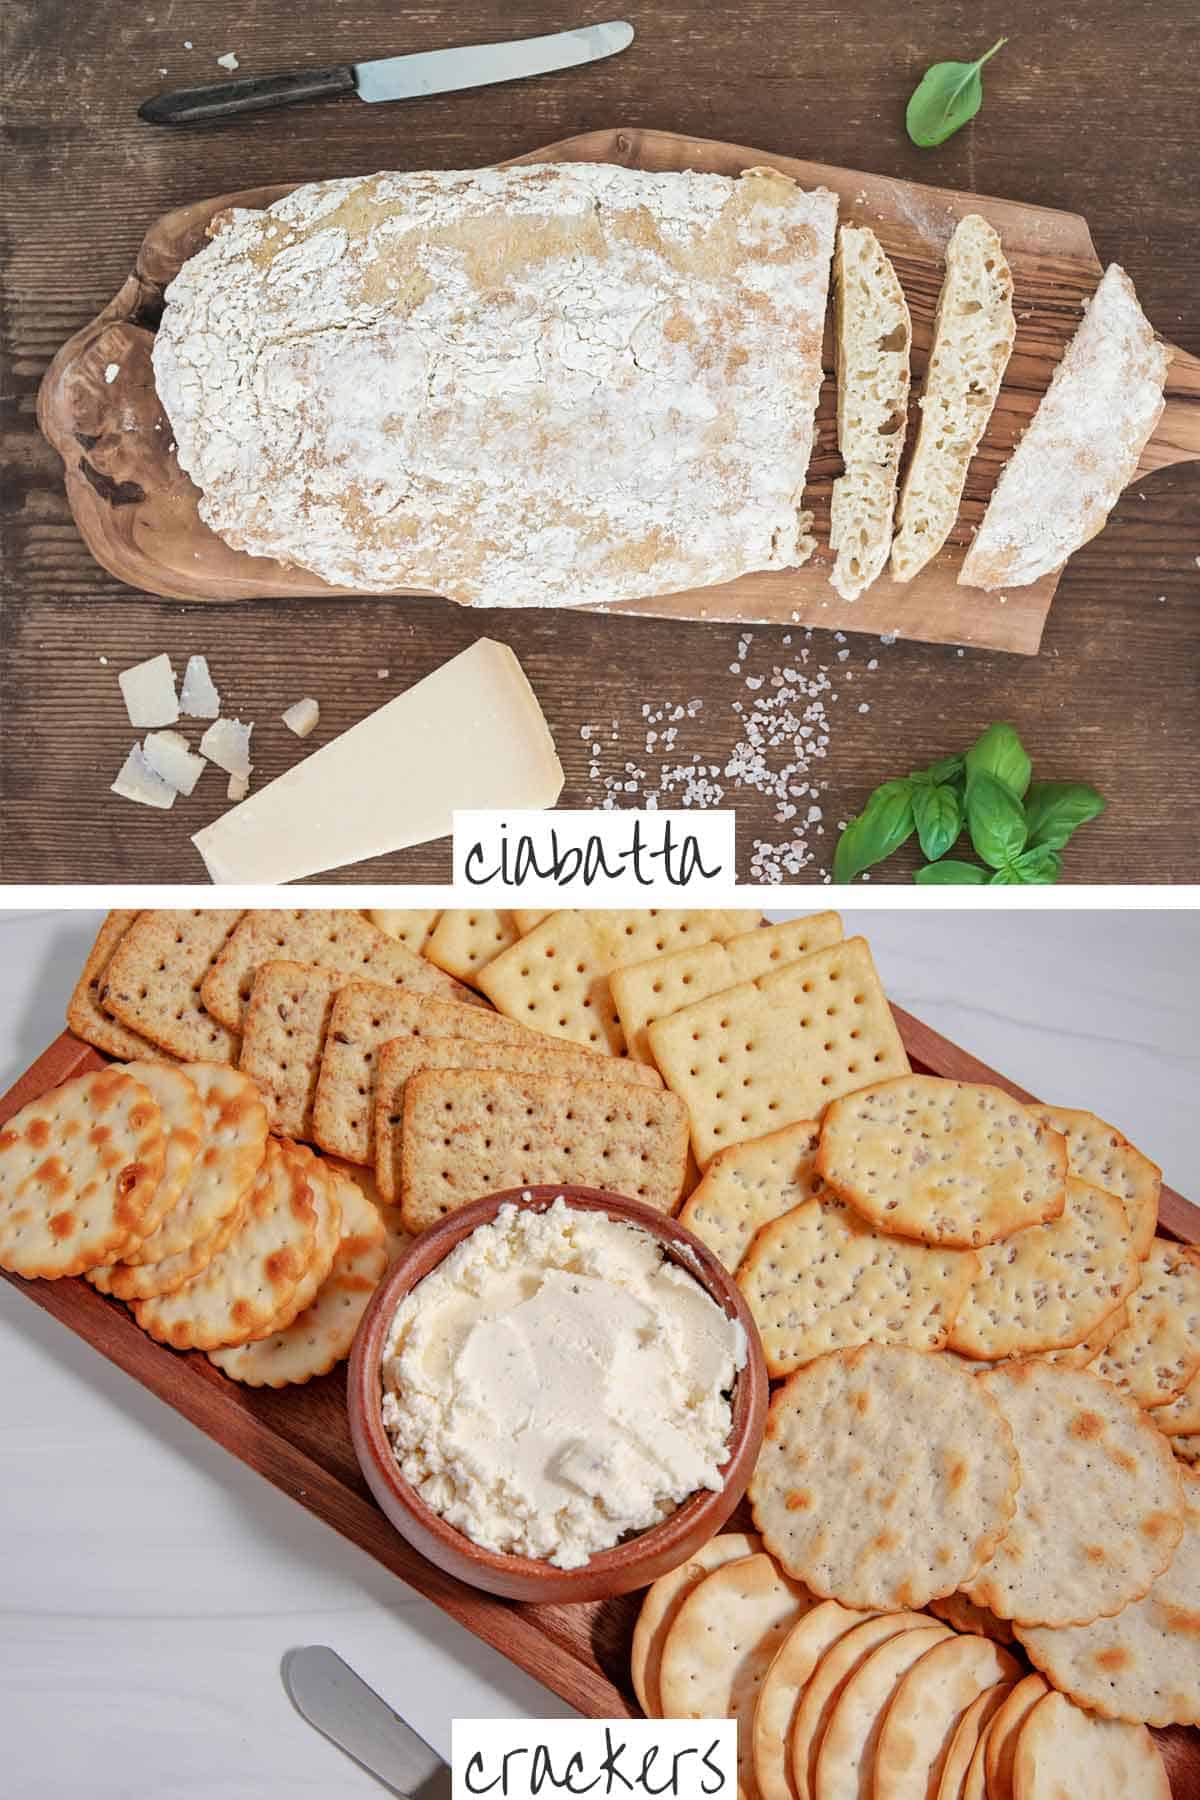 Loaf of ciabatta bread on a cutting board and tray of crackers and cream cheese dip.